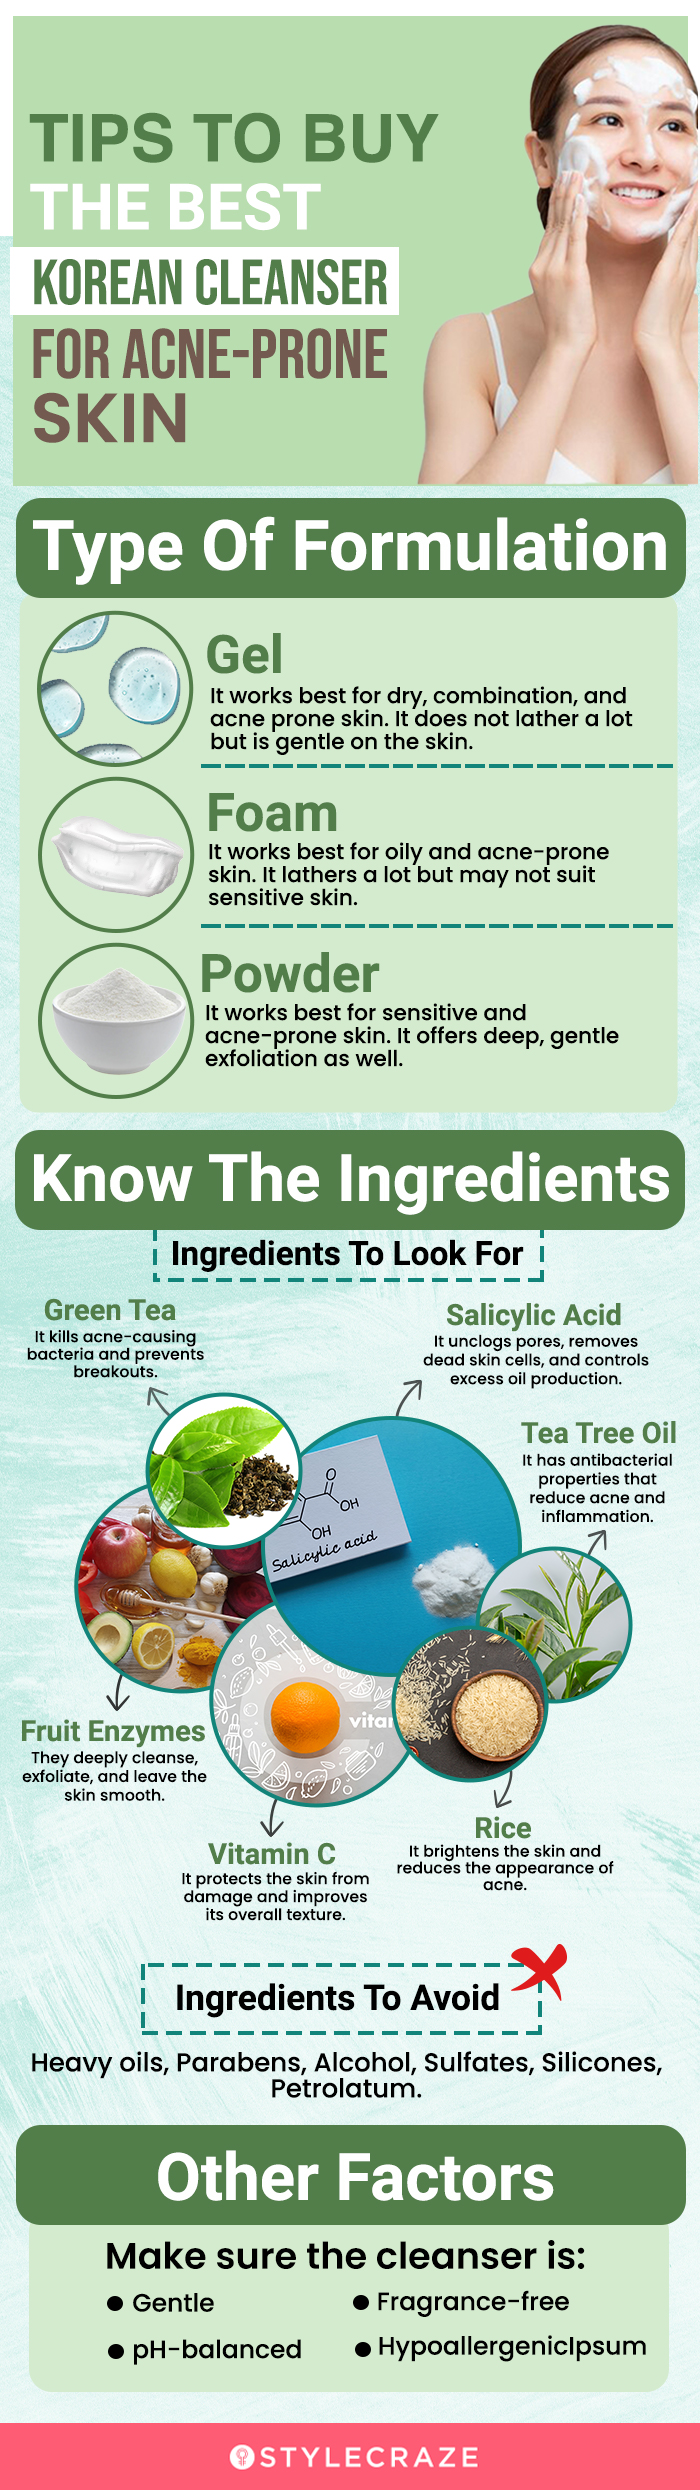 Tips To Buy The Best Korean Cleanser For Acne-Prone Skin (infographic)